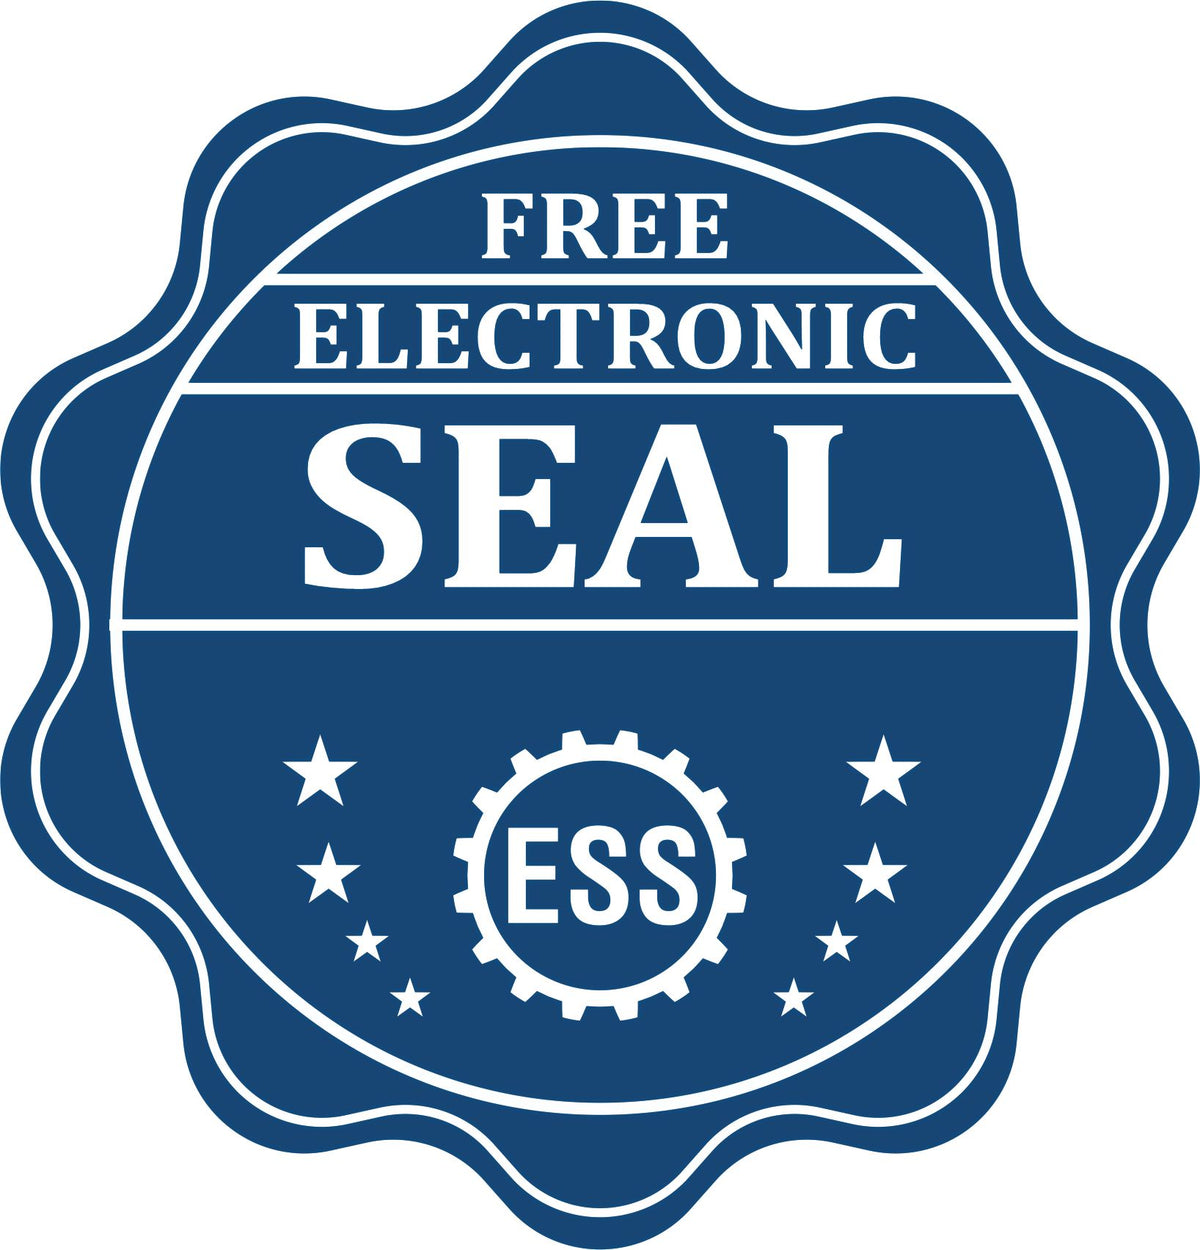 A badge showing a free electronic seal for the Handheld Illinois Professional Engineer Embosser with stars and the ESS gear on the emblem.